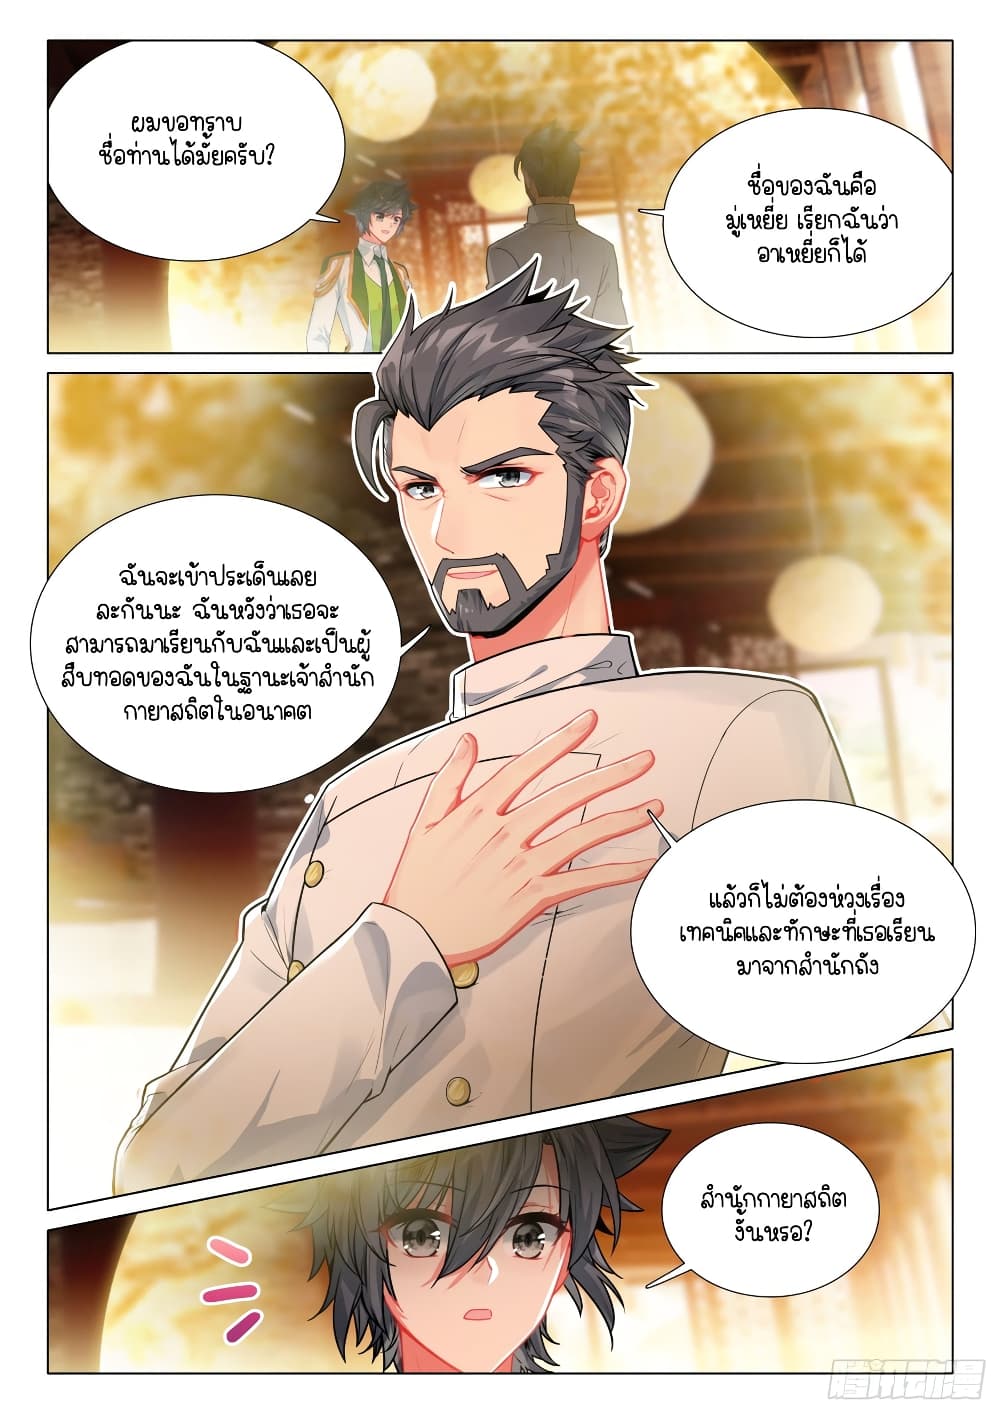 Douluo Dalu 3: The Legend of the Dragon King 297-อุบัติเหตุ